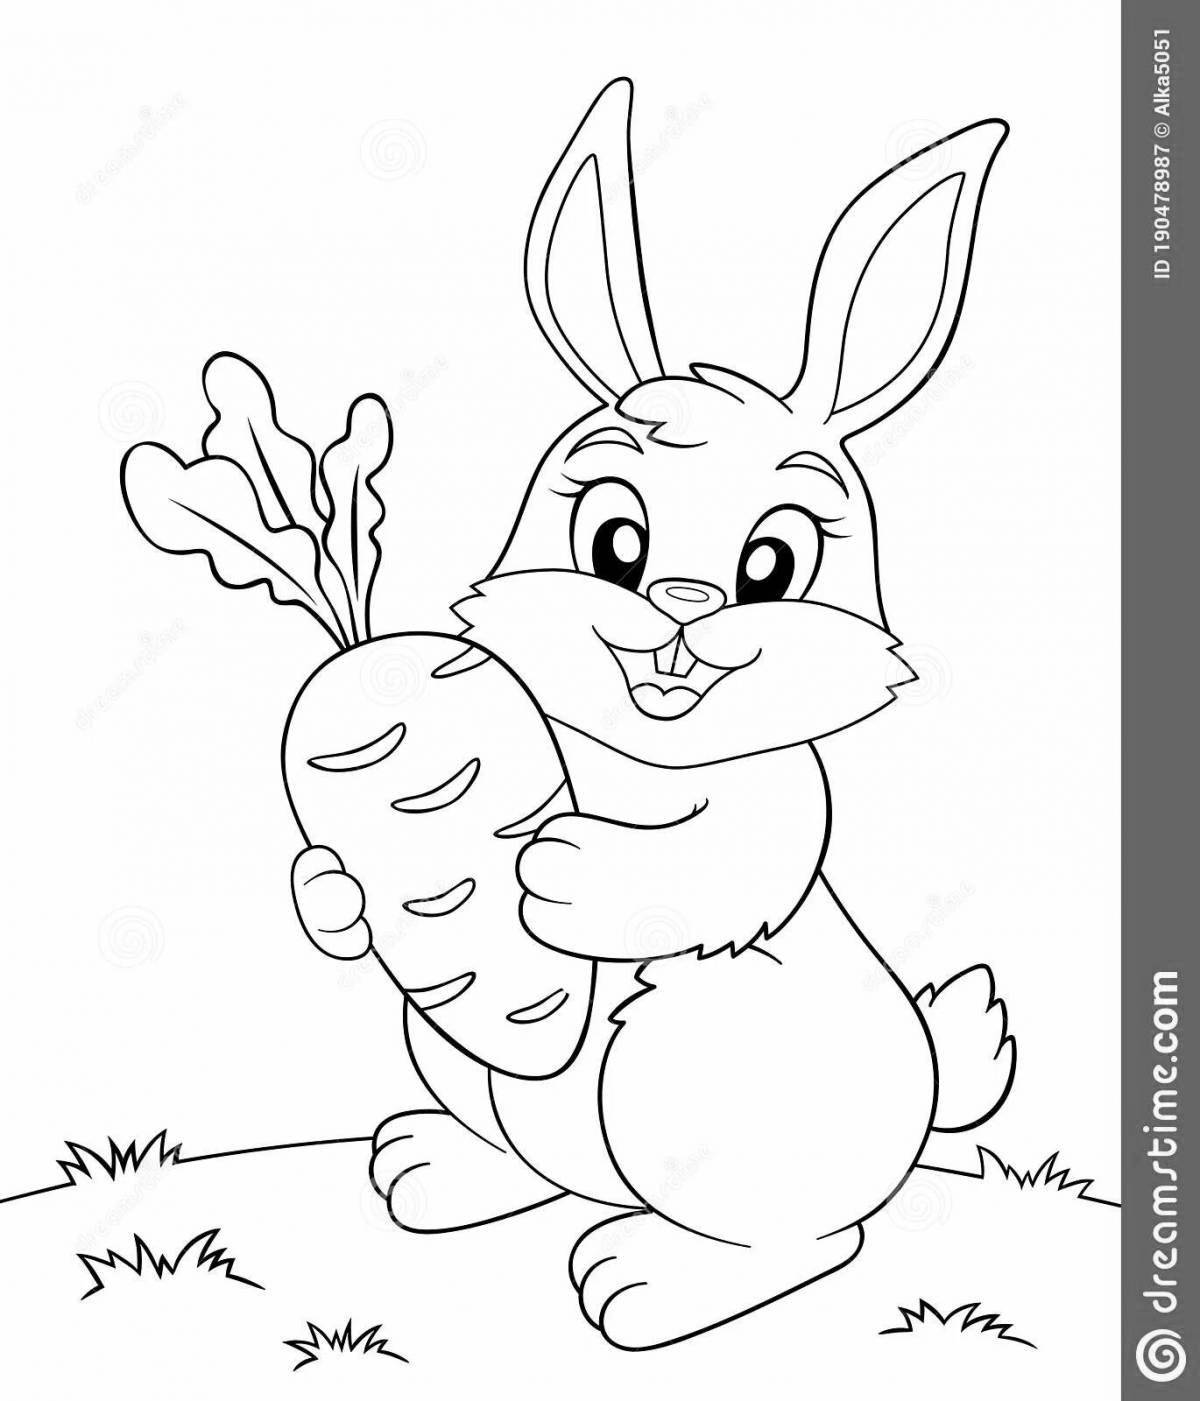 Fluffy bunny coloring book with carrots